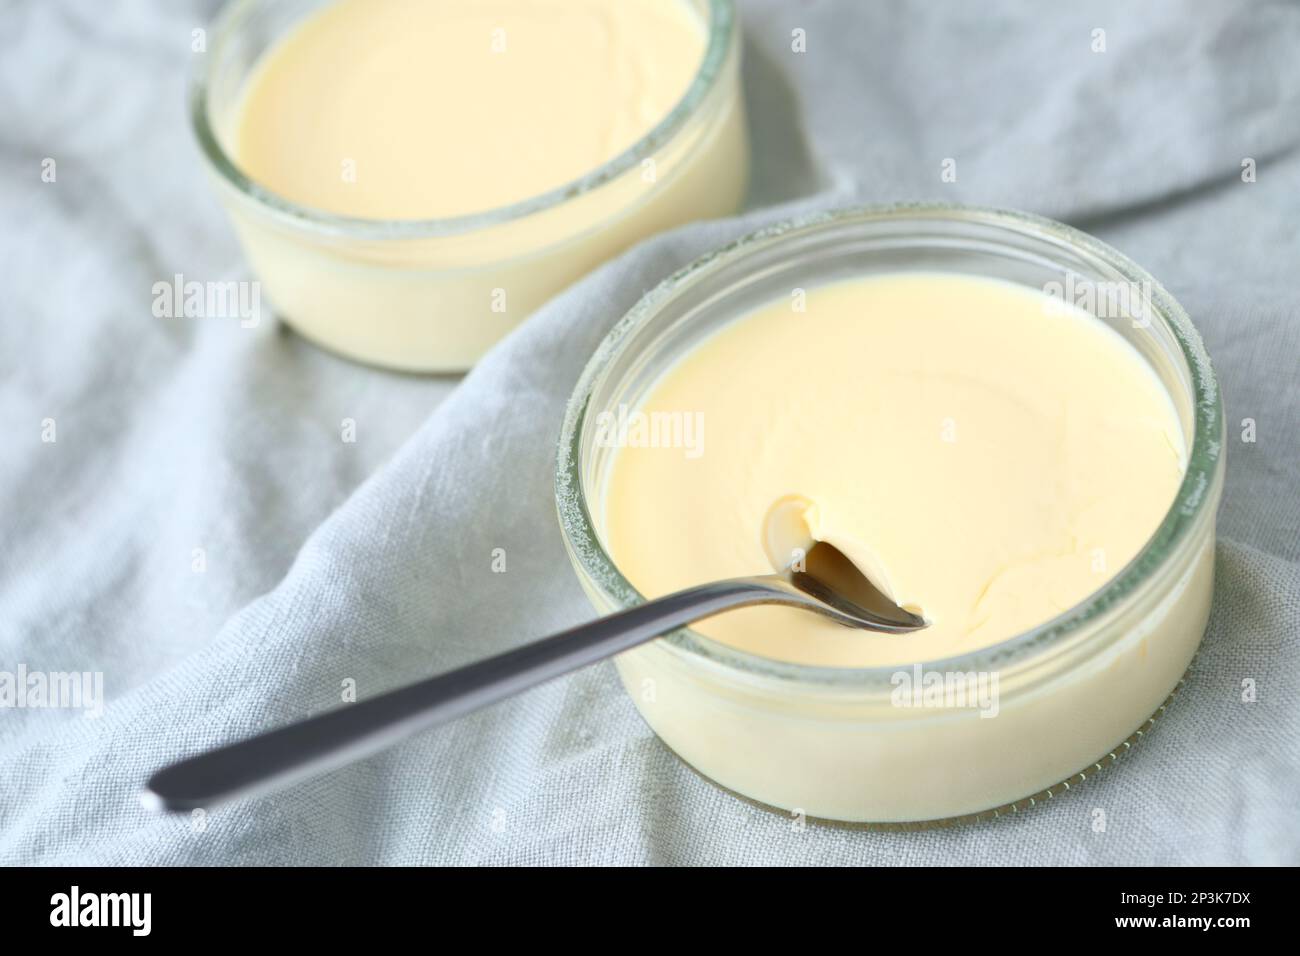 Two portions of crema catalana dessert on a cyan tablecloth Stock Photo